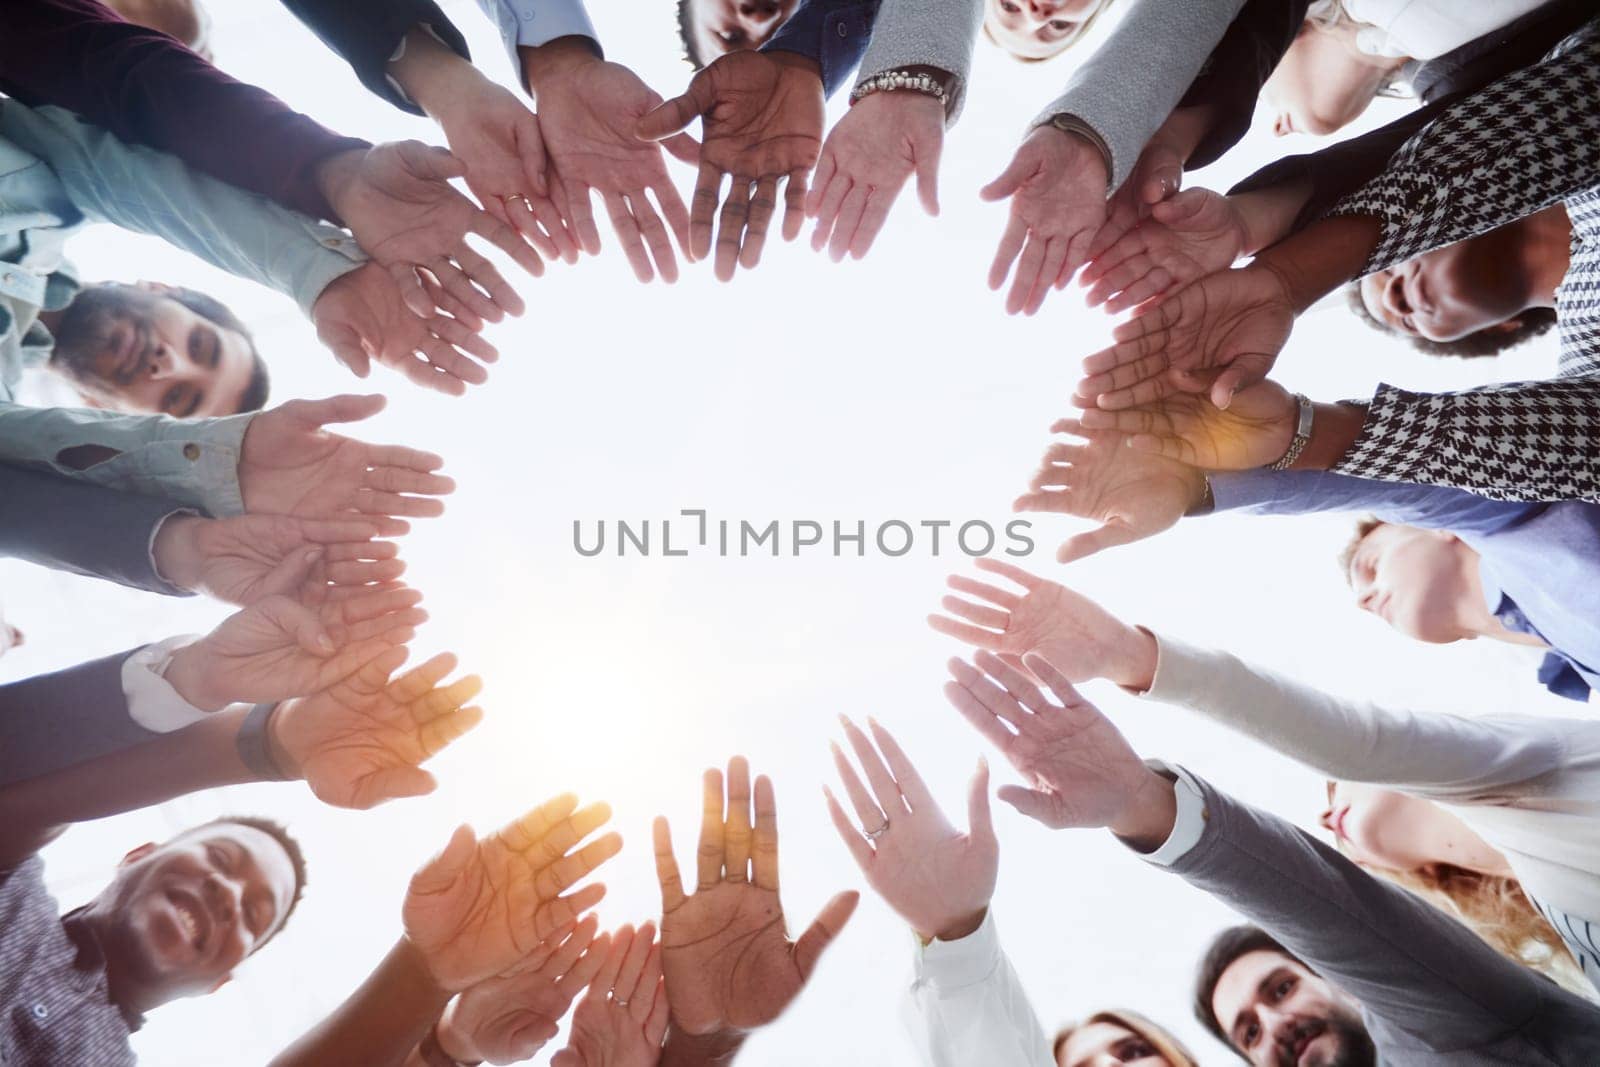 People of different ethnicities uniting to cooperate together by Prosto